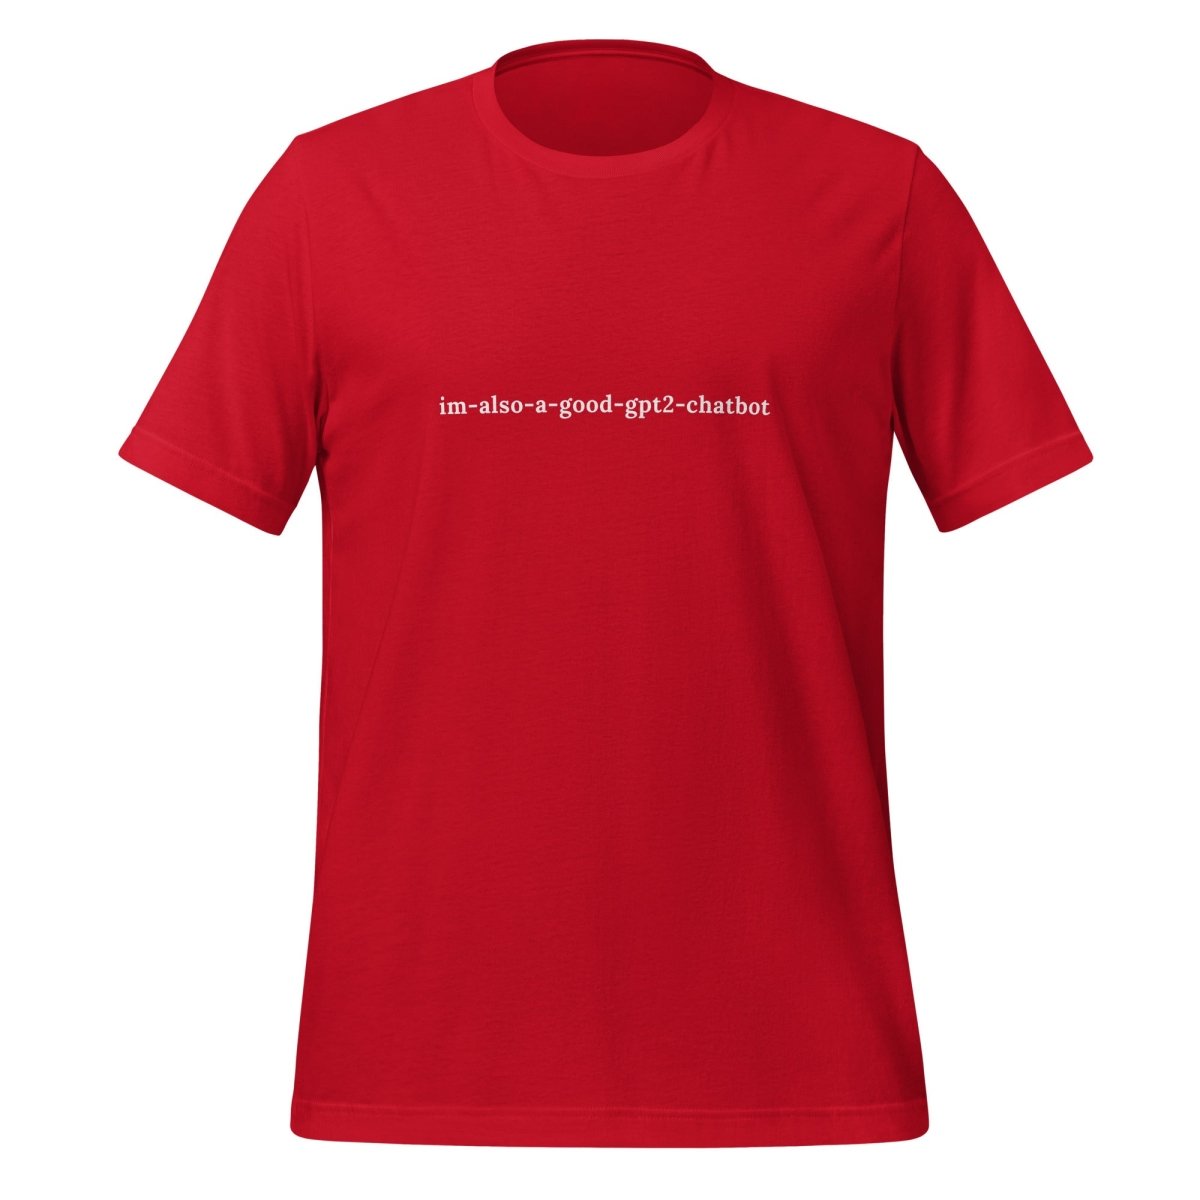 im - also - a - good - gpt2 - chatbot T - Shirt (unisex) - Red - AI Store